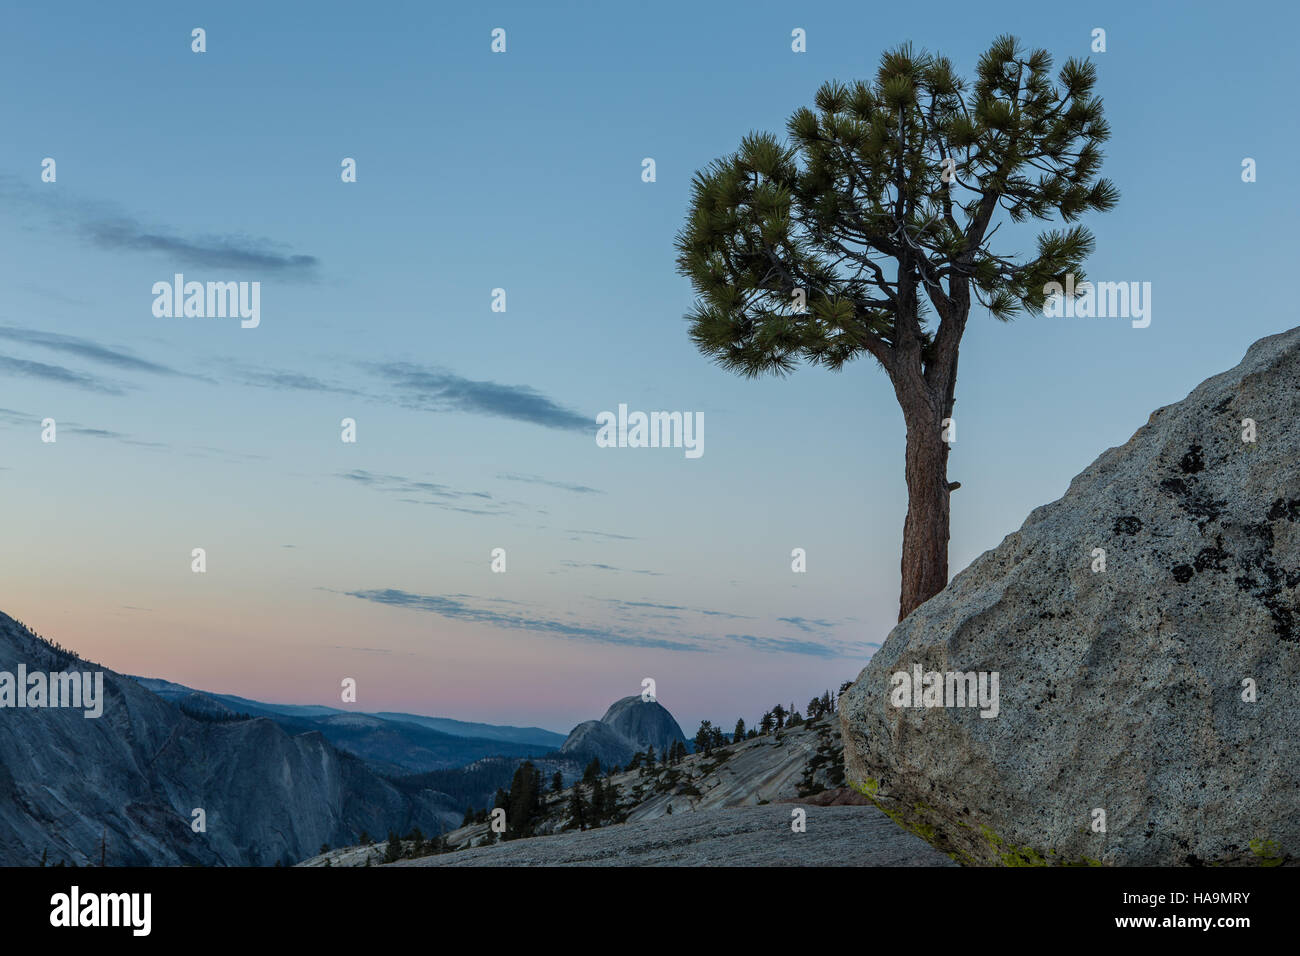 Jeffrey Pine tree (Pinus jeffreyi) standing alone at Olmsted Point Yosemite National Park with half dome in the background Stock Photo